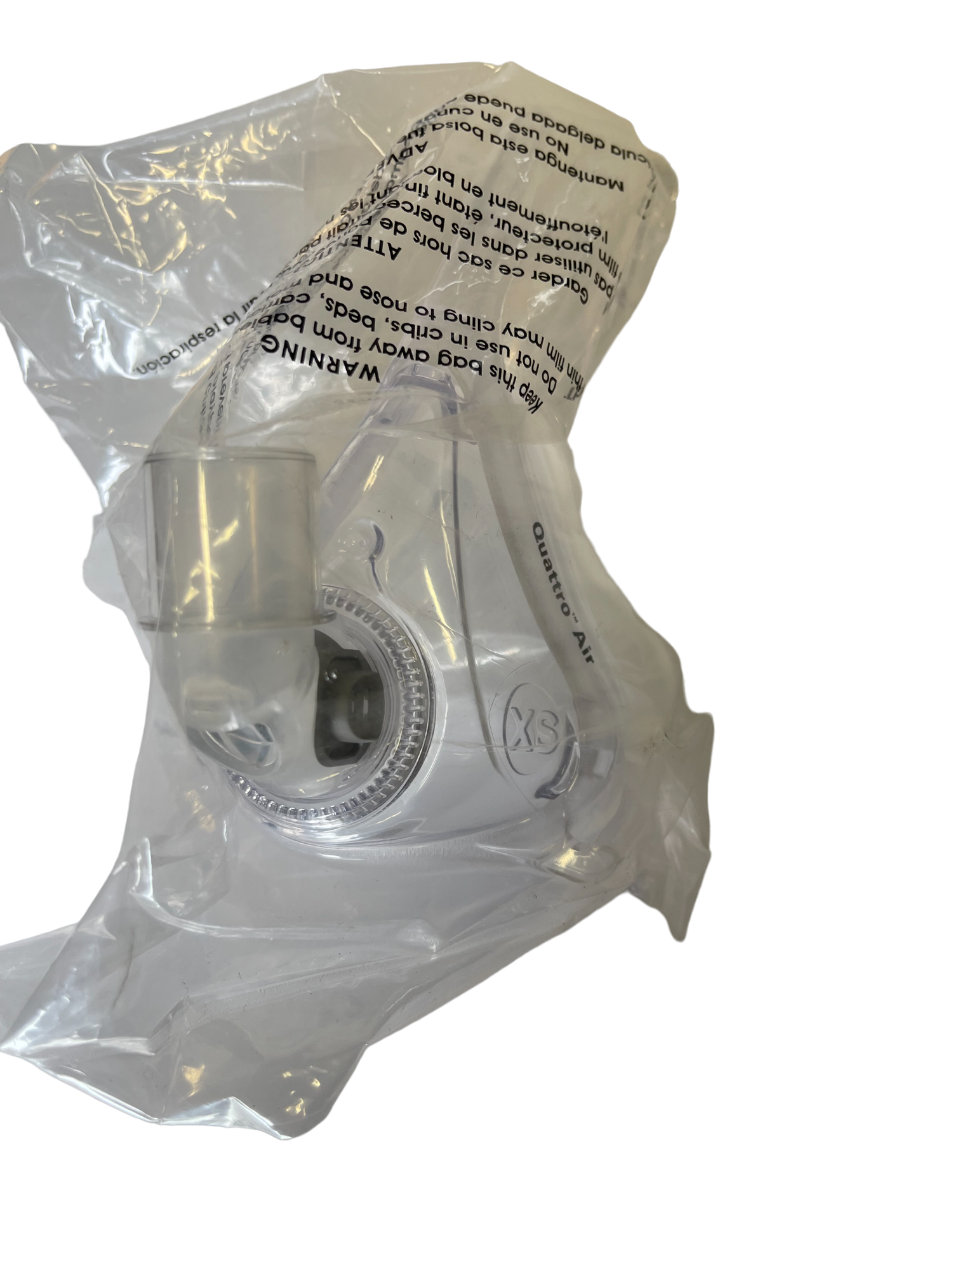 ResMed Quattro Air CPAP Mask Assembly Kit